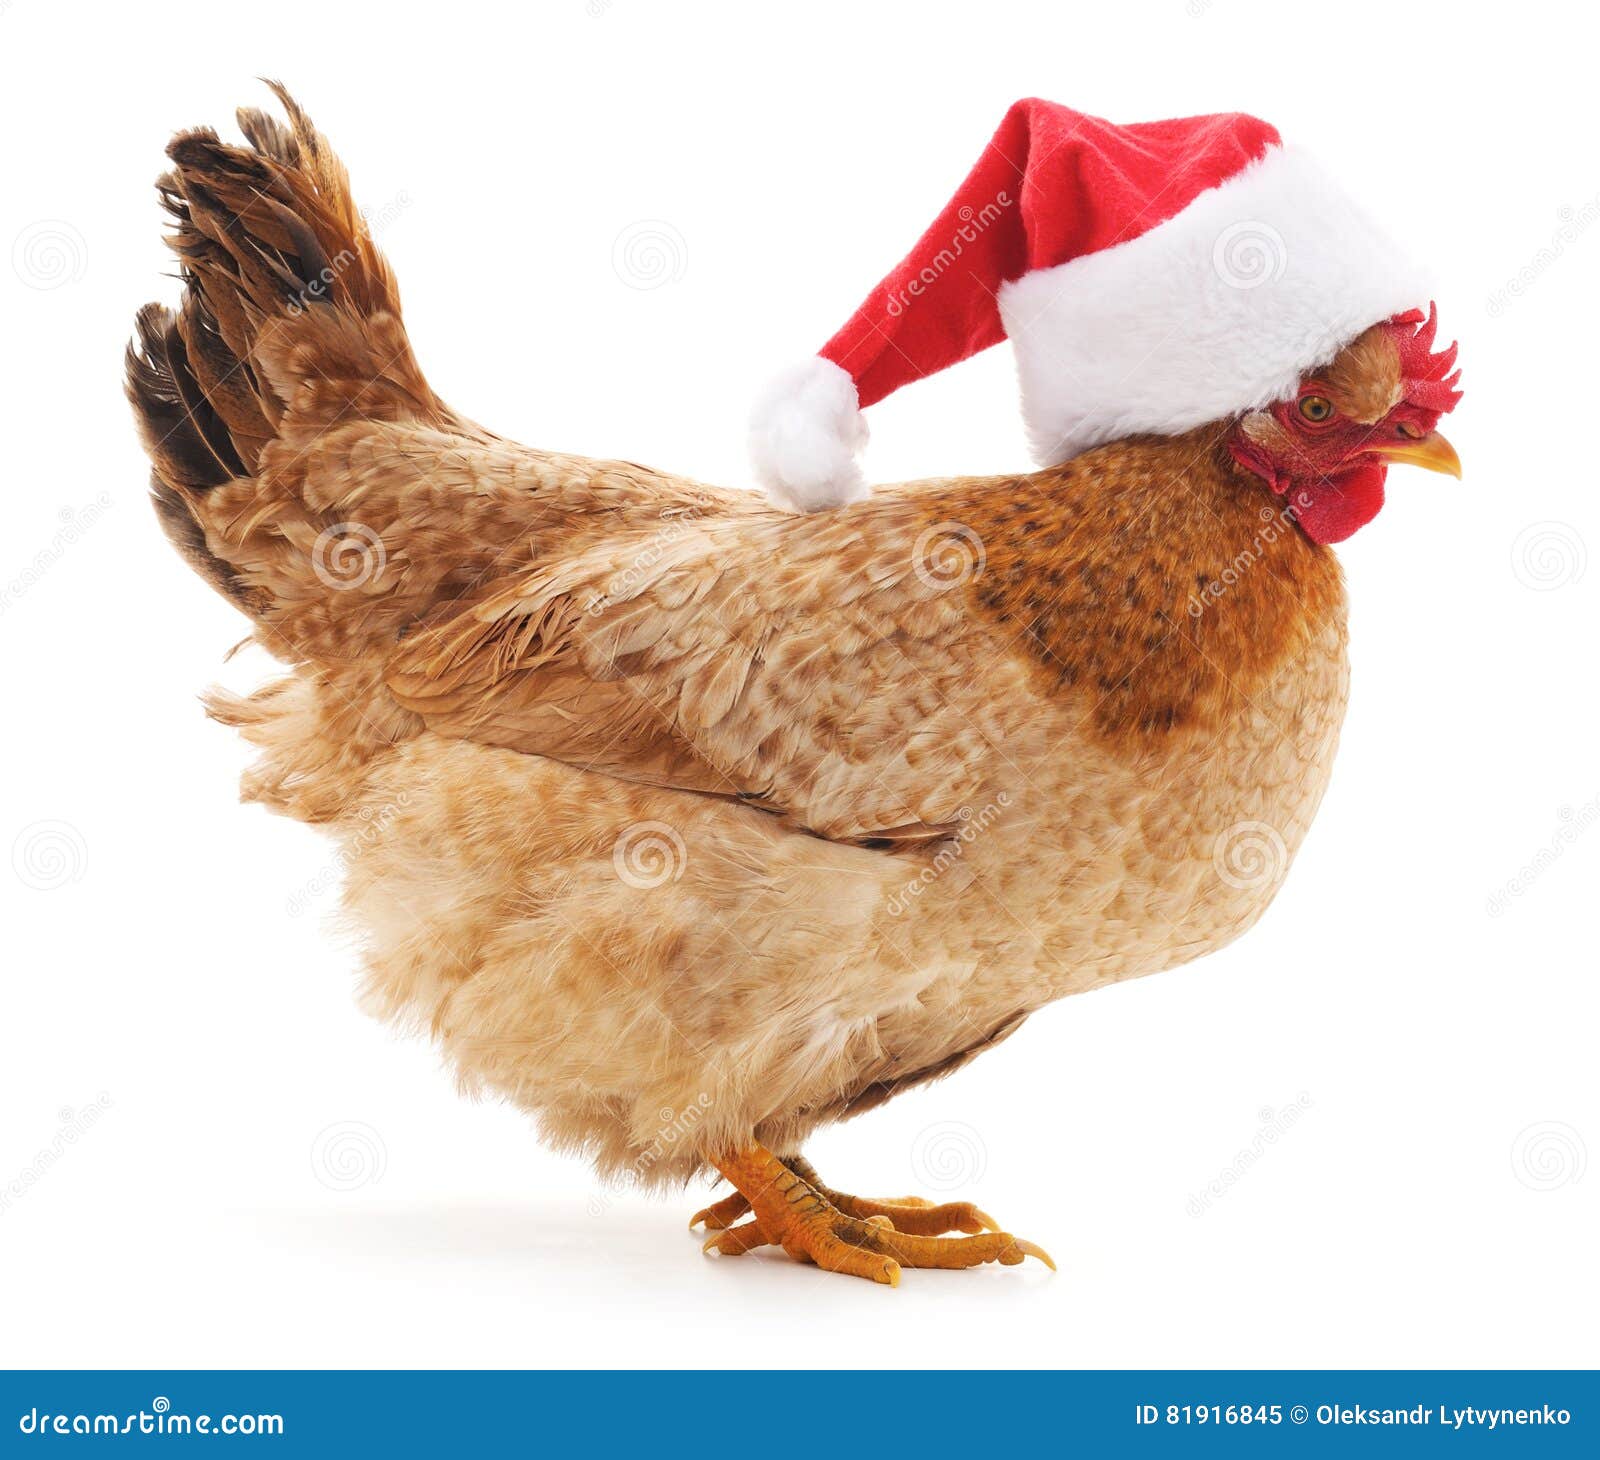 Chicken In Christmas Hat Stock Image Image Of Cockerel 81916845